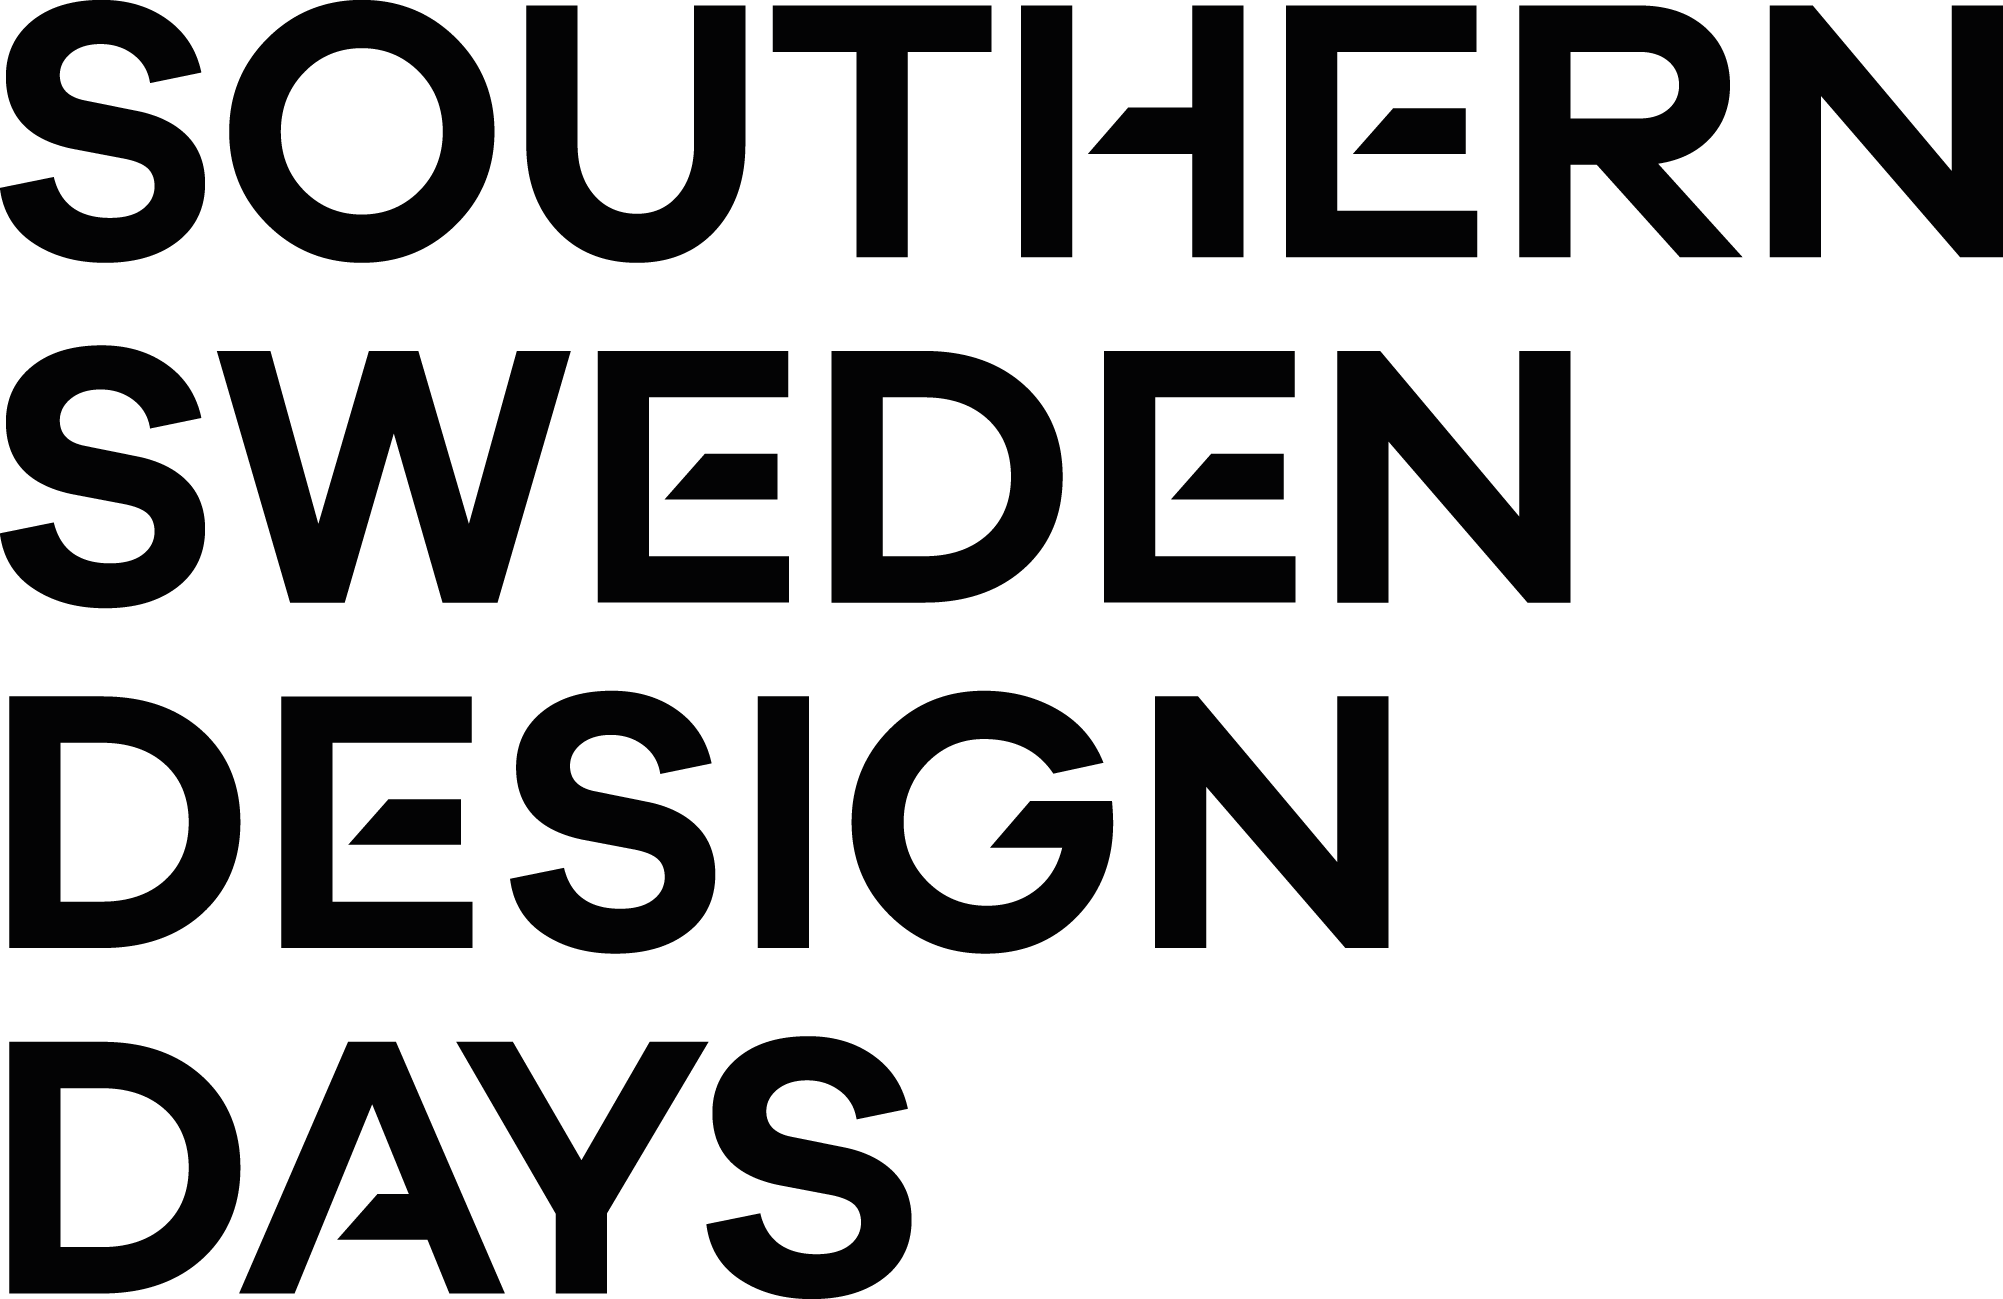 Picture of Southern Sweden Design Days 19/5 - 22/5